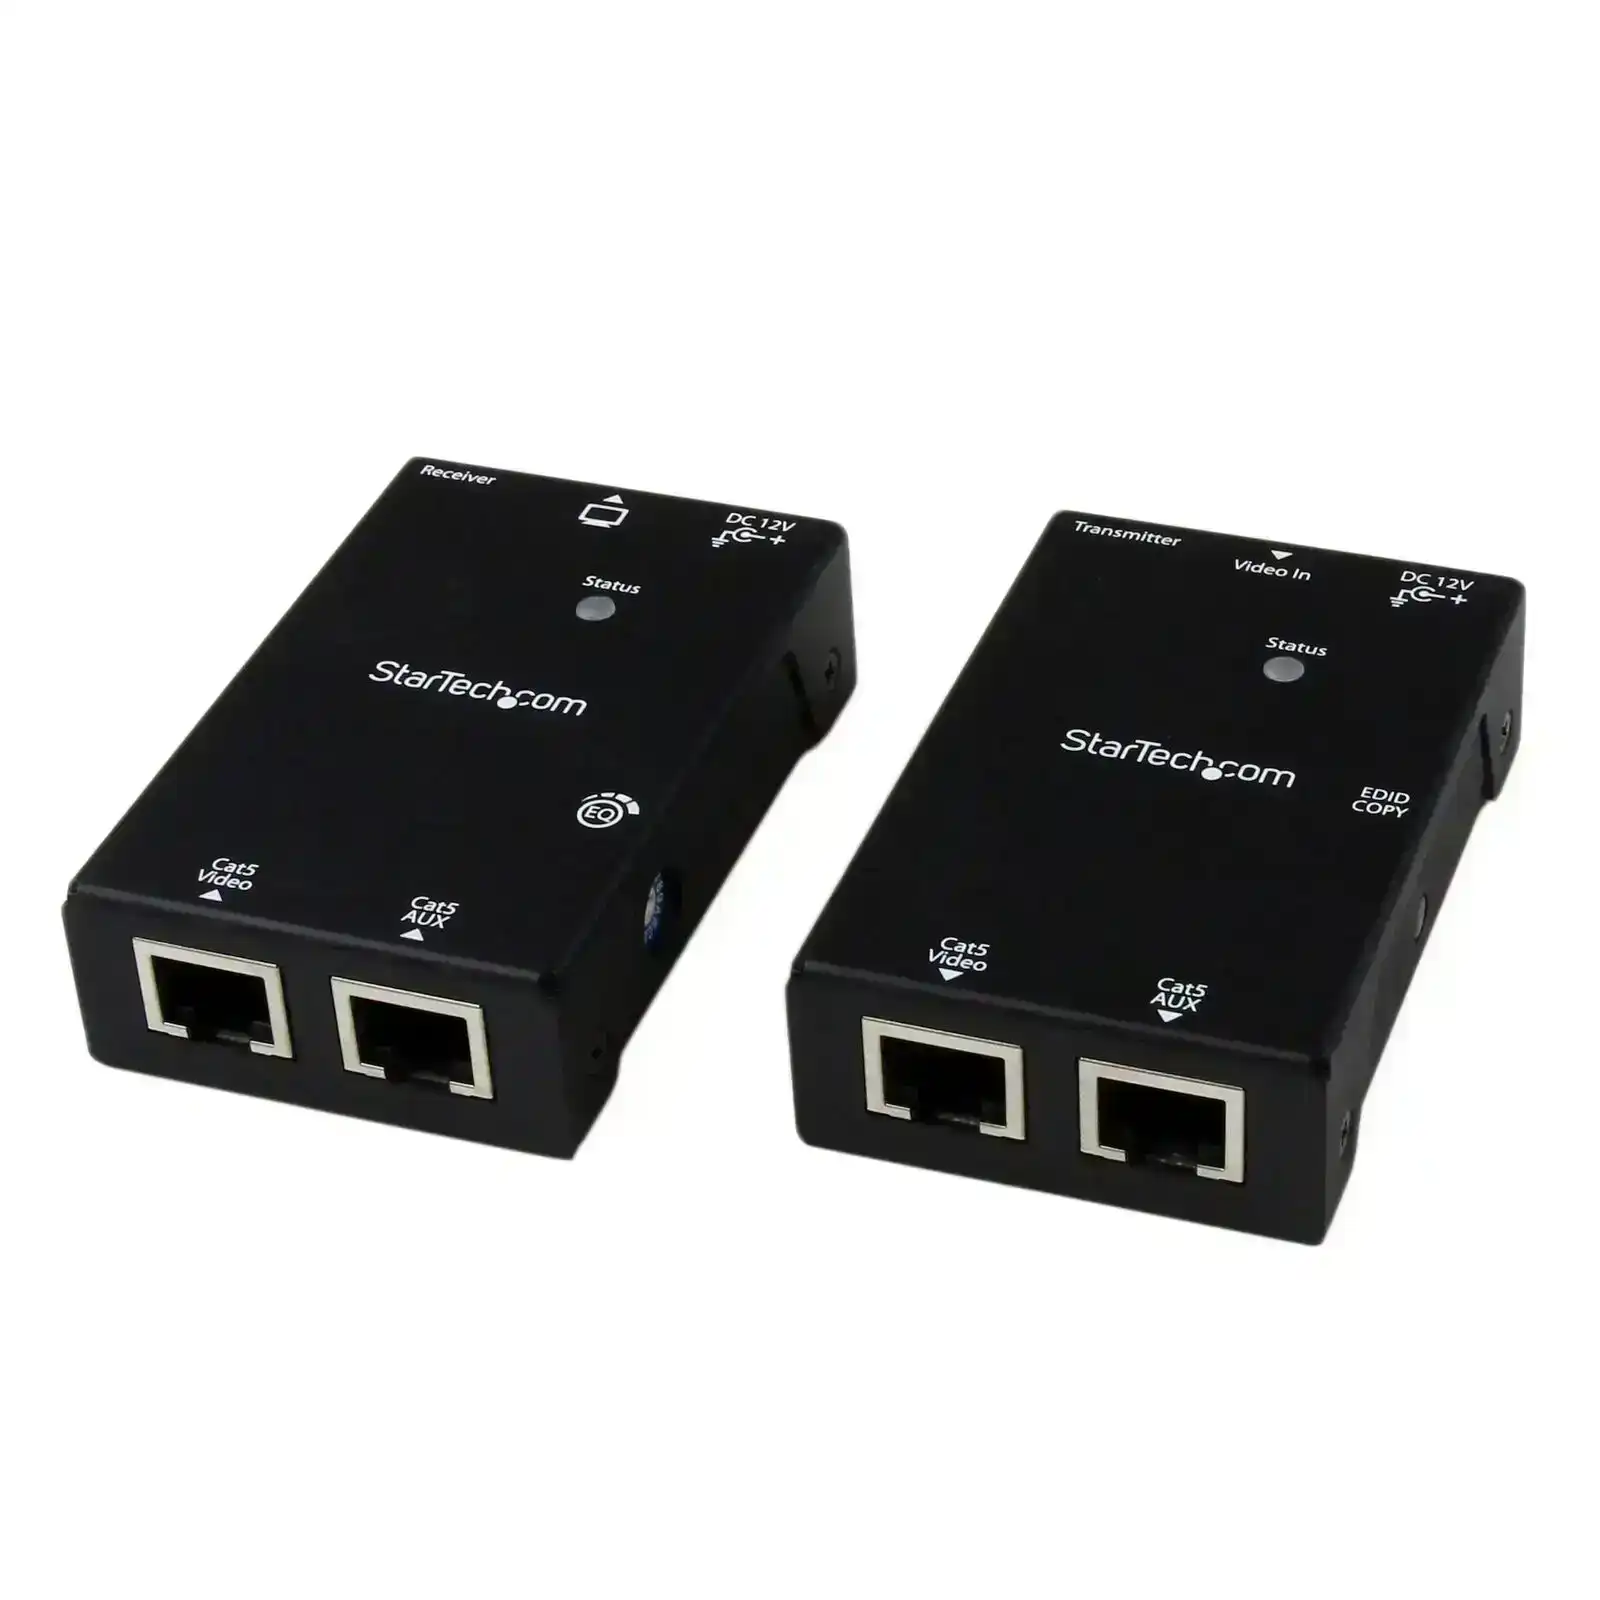 Star Tech 50m HDMI Over CAT5/CAT6 RJ-45 Video/Audio Extender w/ Power Over Cable